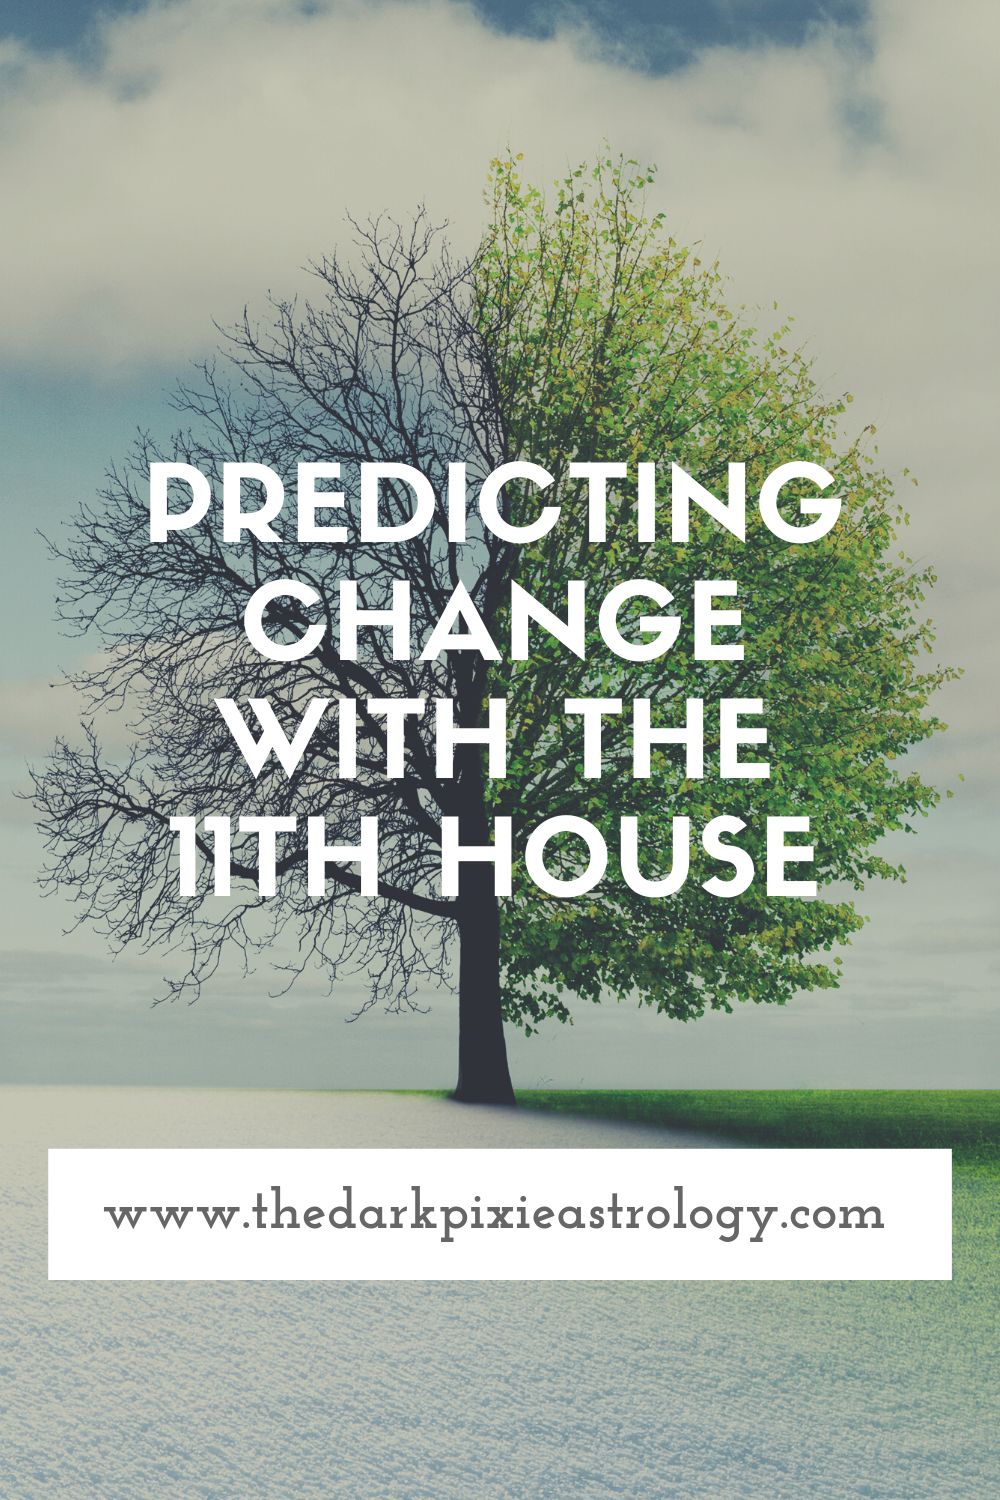 Predicting Change With the 11th House - The Dark Pixie Astrology